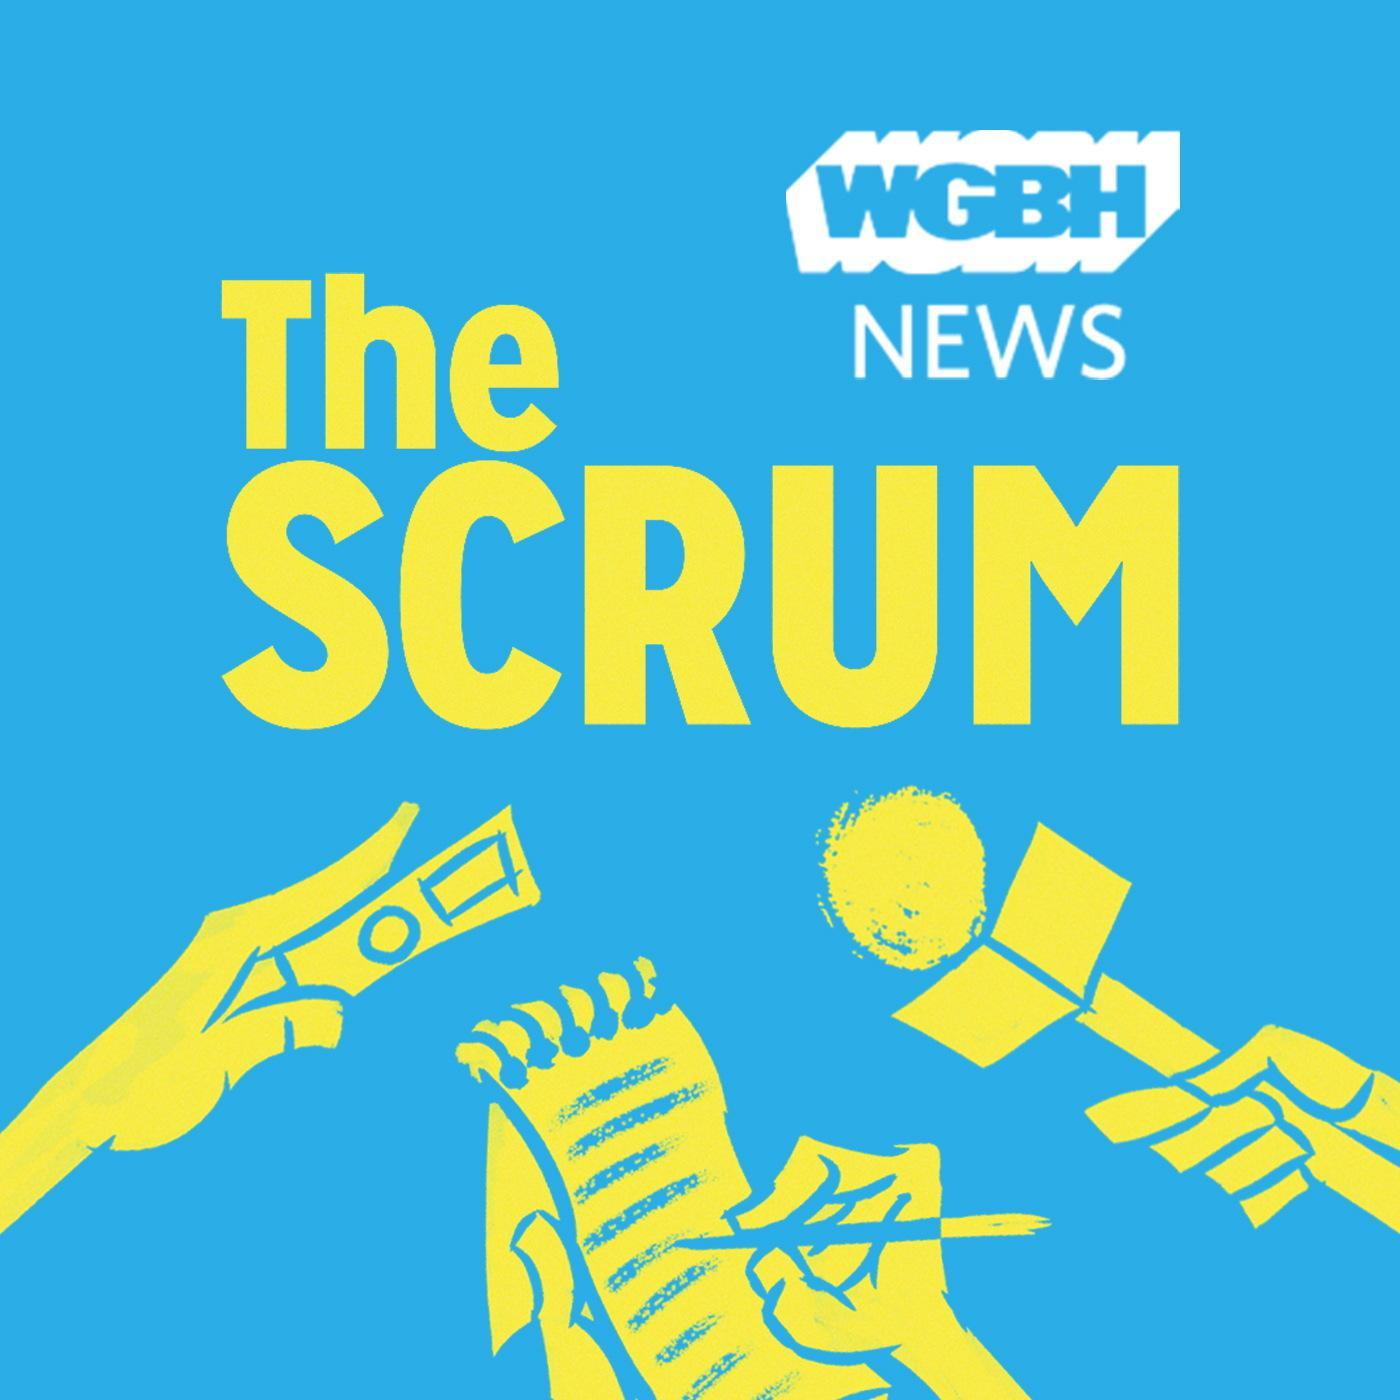 Thumbnail for "Andrea Campbell: The Scrum Interview".